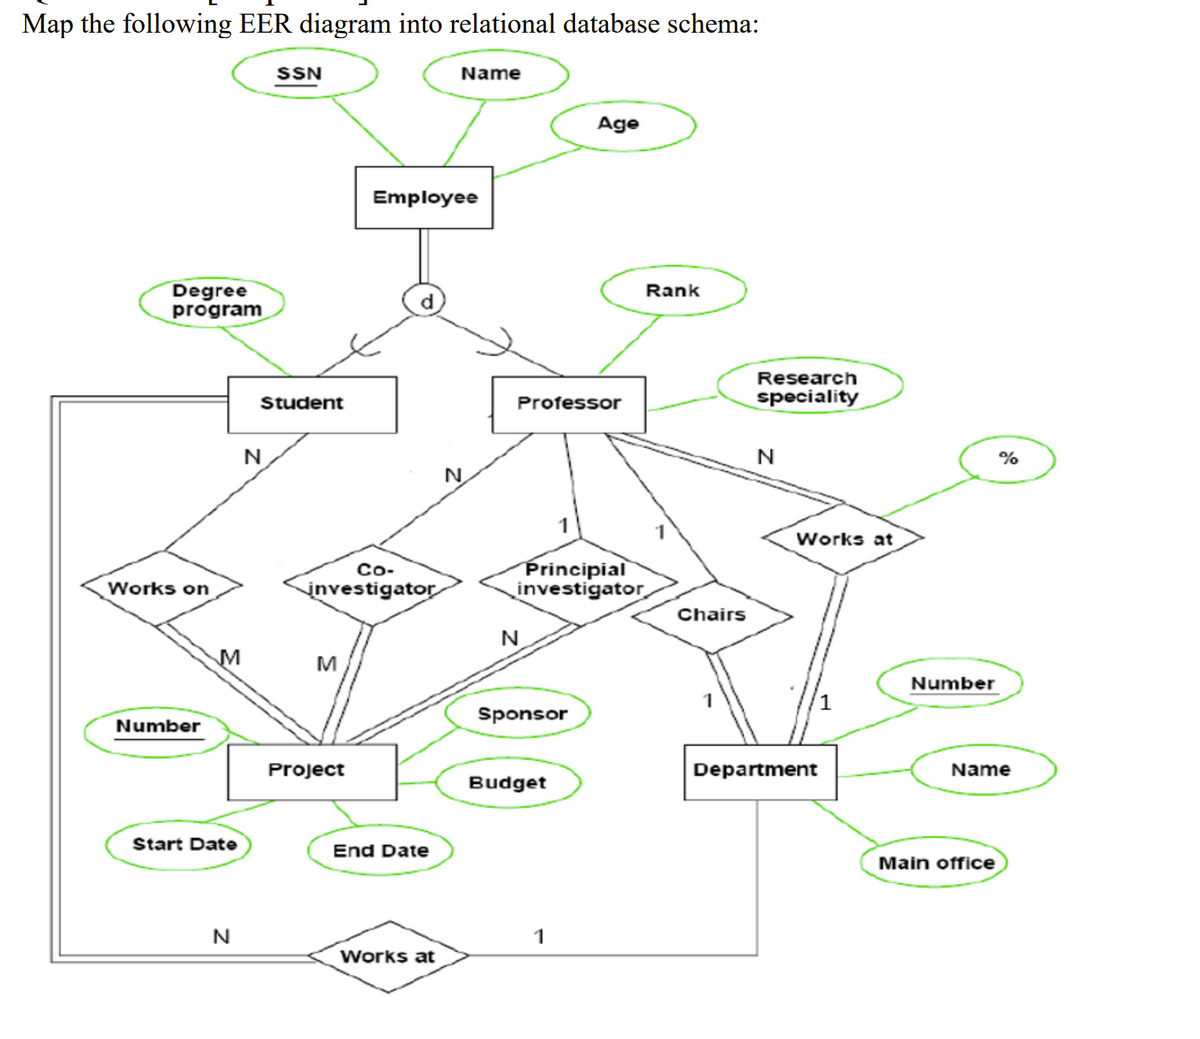 Map the following EER diagram into relational database schema:
Degree
program
Works on
Number
M
Start Date
N
SSN
Student
N
Co-
investigator
M
Project
Employee
End Date
Name
Works at
N
Professor
N
Principial
investigator
Sponsor
Age
Budget
1
Rank
Chairs
Research
speciality
N
Works at
Department
Number
%
Name
Main office